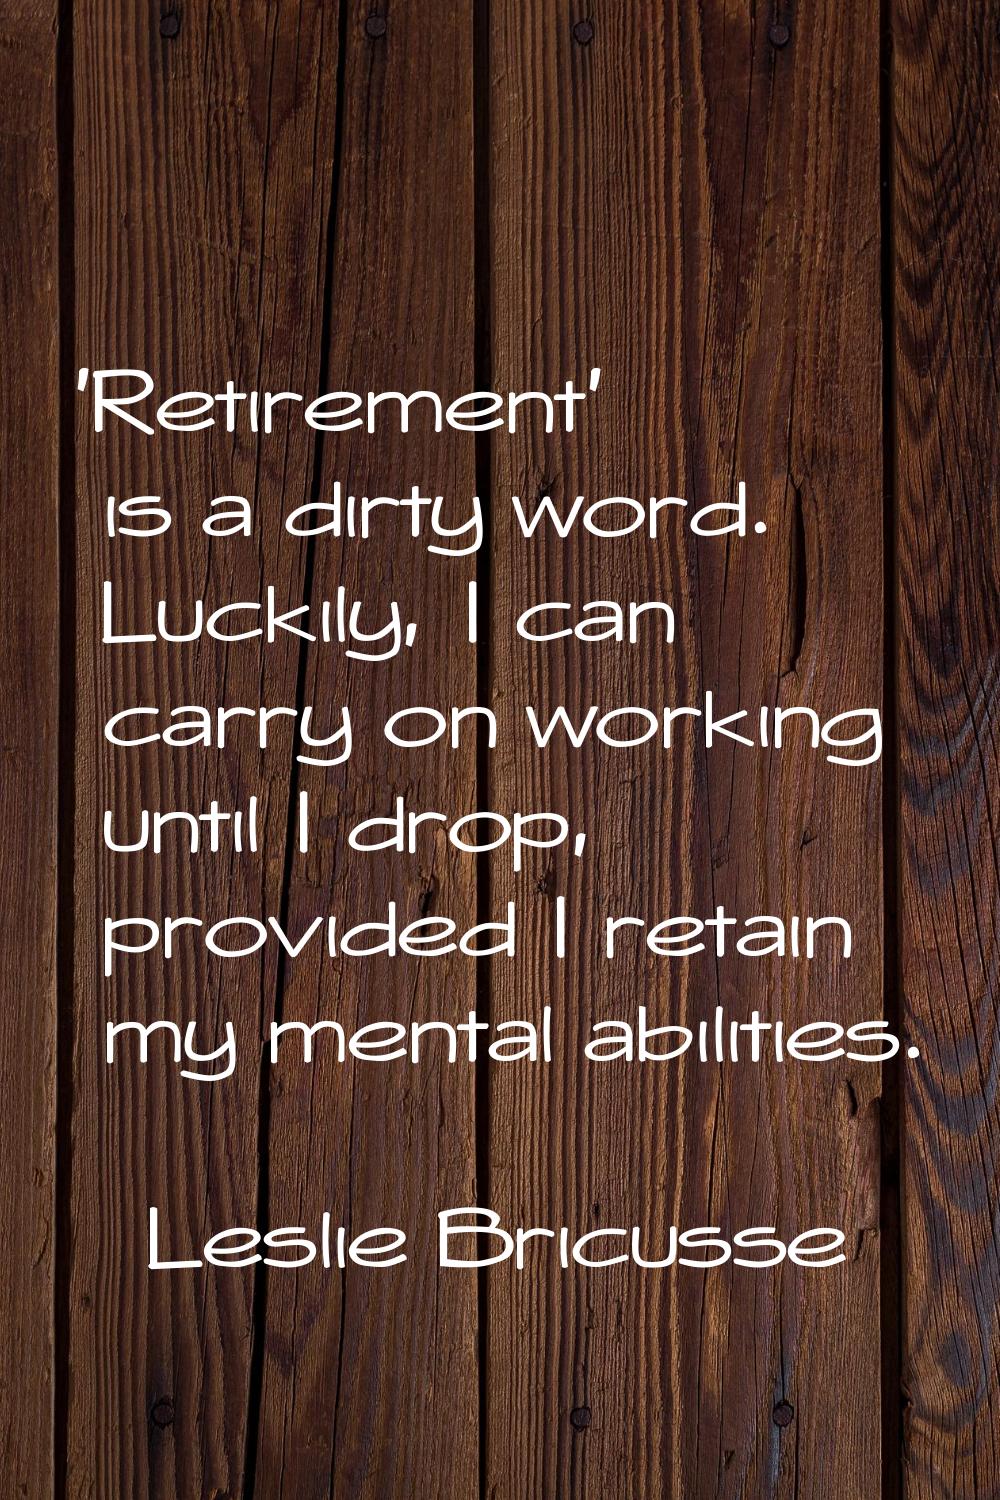 'Retirement' is a dirty word. Luckily, I can carry on working until I drop, provided I retain my me